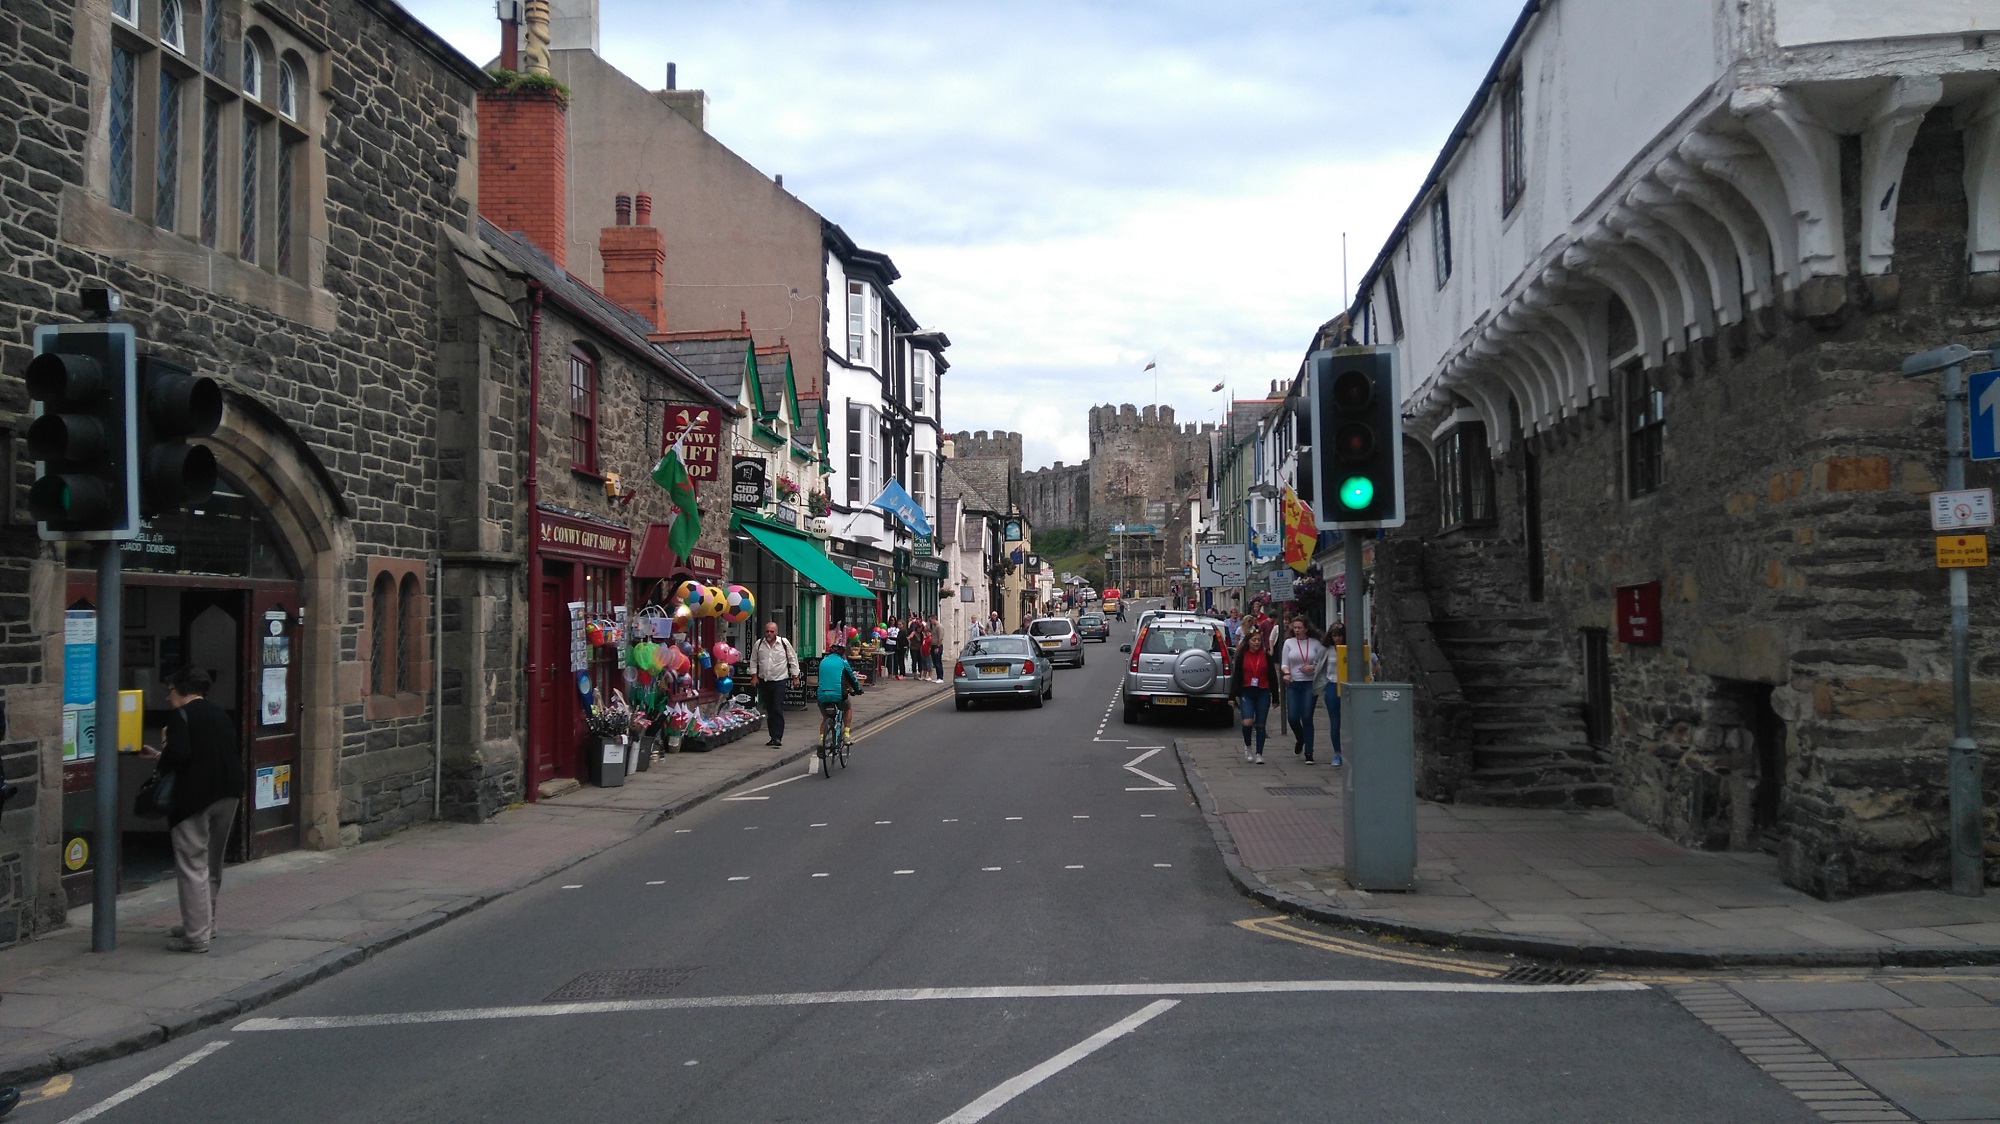 A road junction in the historic Welsh town of Conwy. Picturesque buildings are present, and the castle is visible in the background.